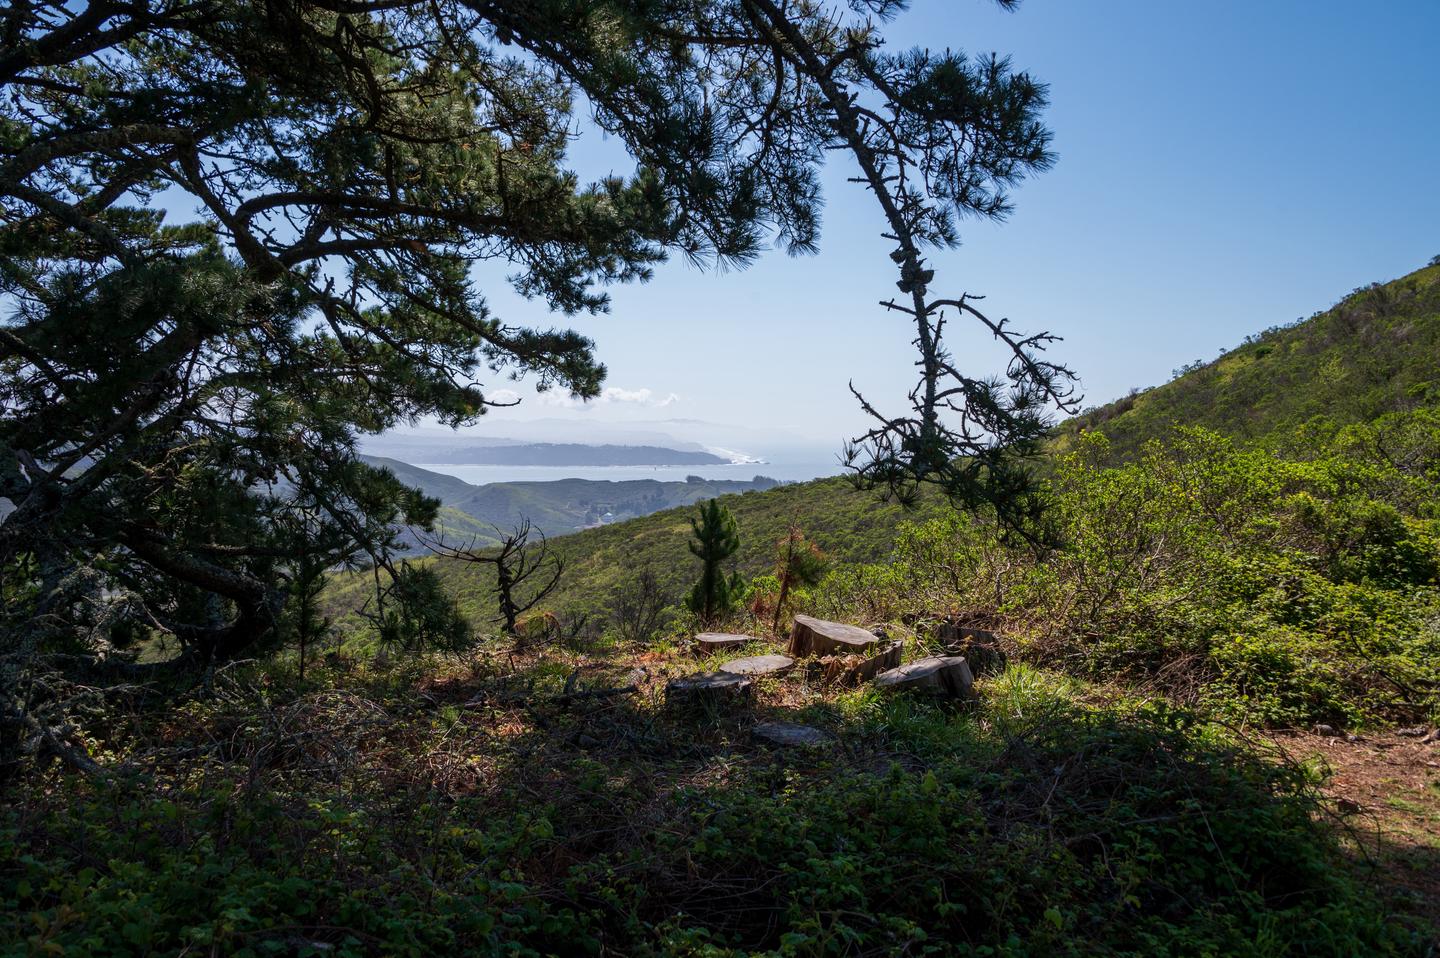 Views from Hawk Camp site 3. In the foreground is some tree stumps and a mature pine tree to the left. Beyond that are the hills of the headlands, the strait of the Golden Gate, and the edge of San Francisco.View from Site 3 at Hawk Camp.